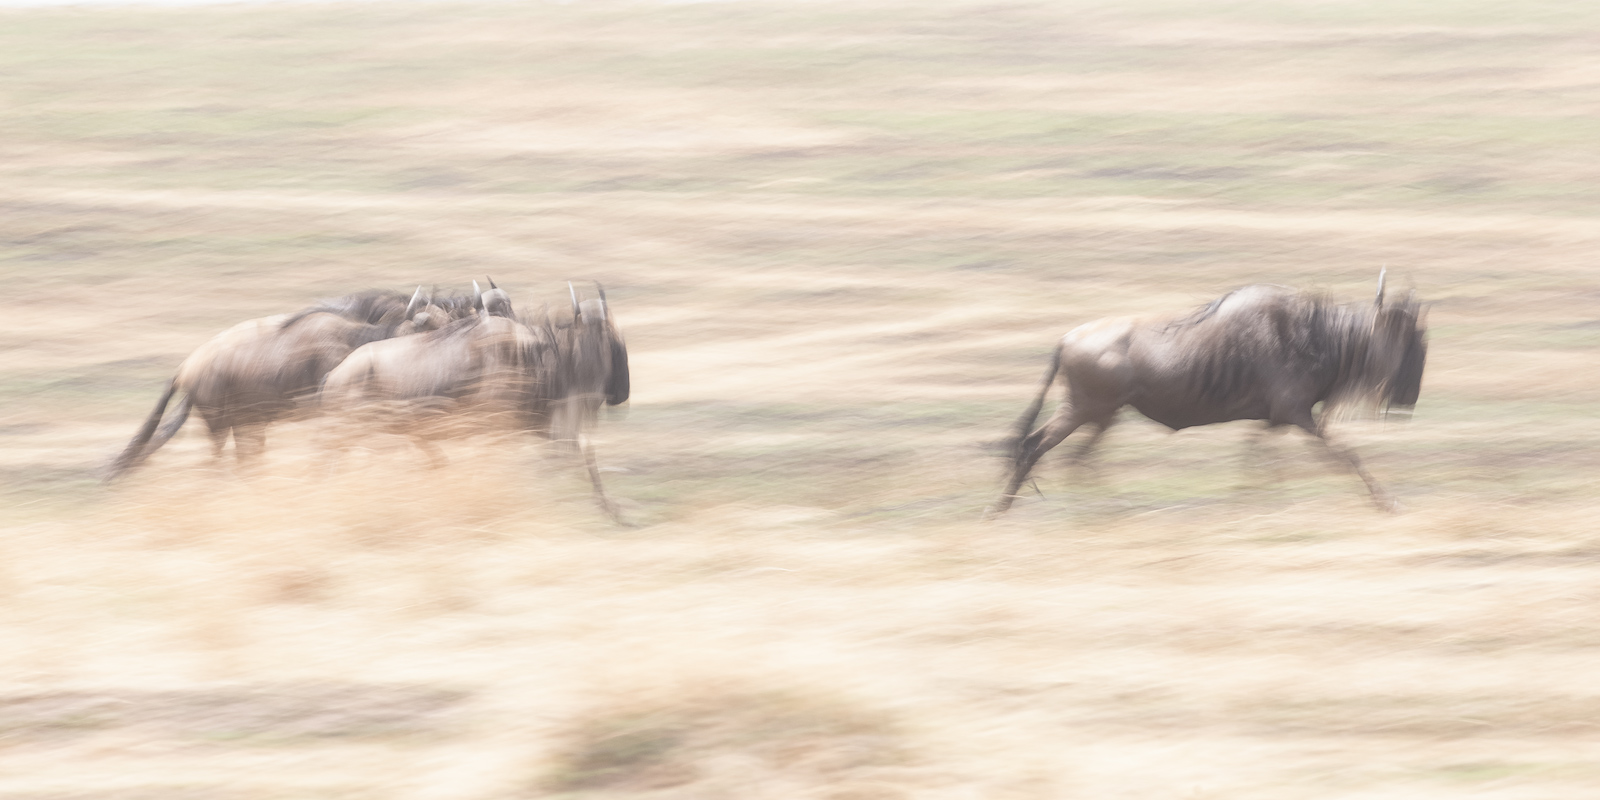 Wildebeests on the move as they participate in the Great Migration.